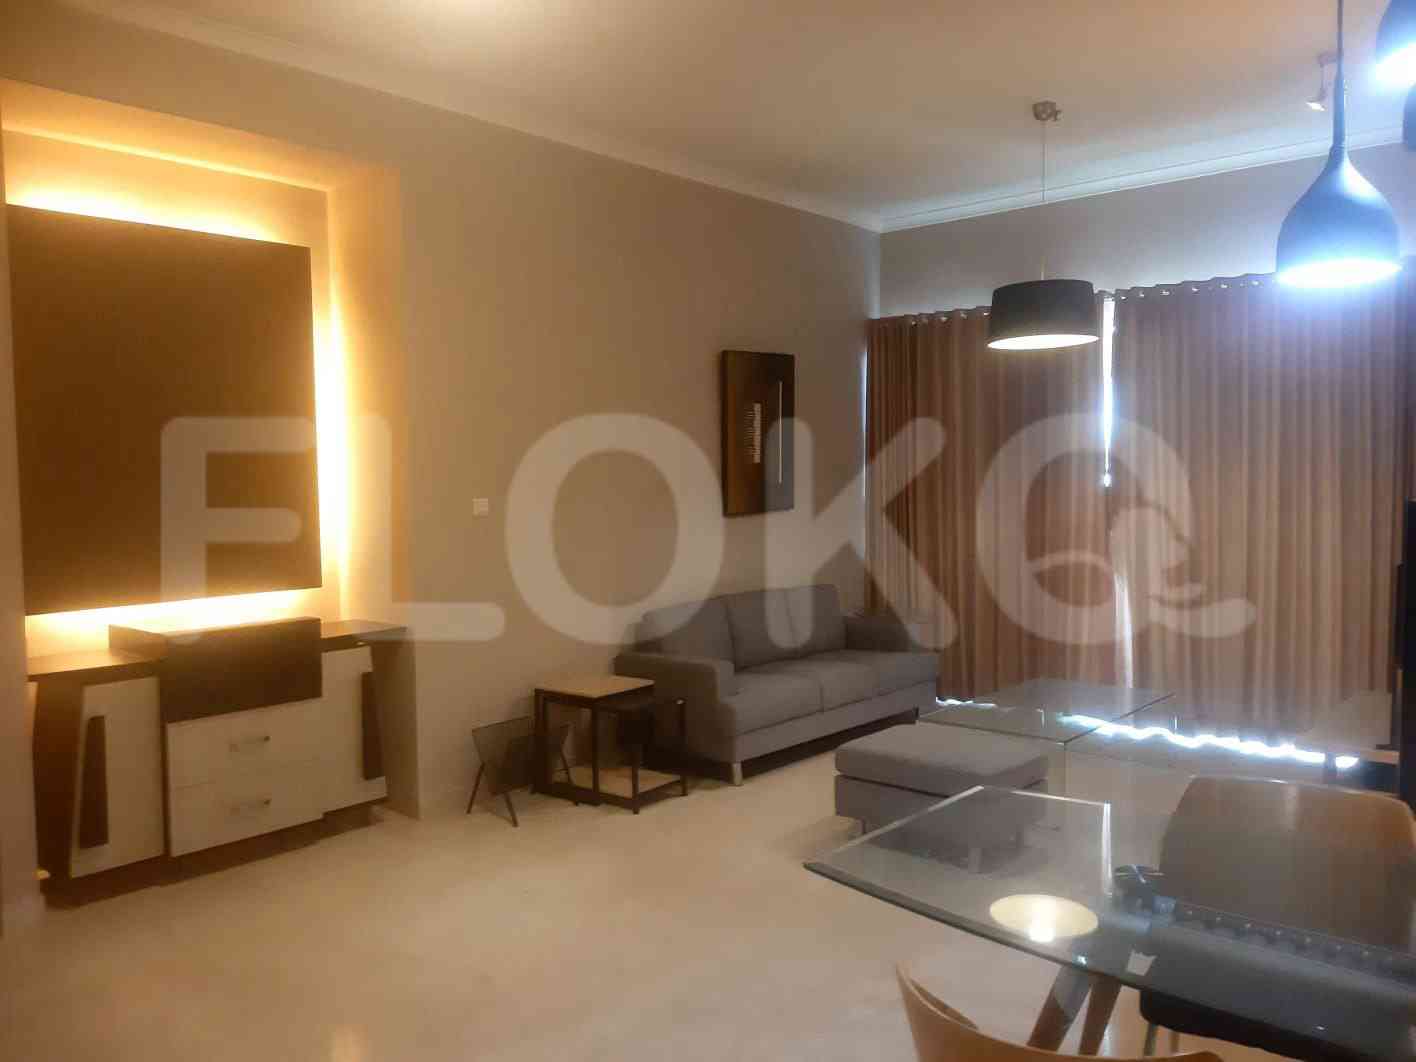 3 Bedroom on 15th Floor for Rent in Senayan Residence - fse4a8 8